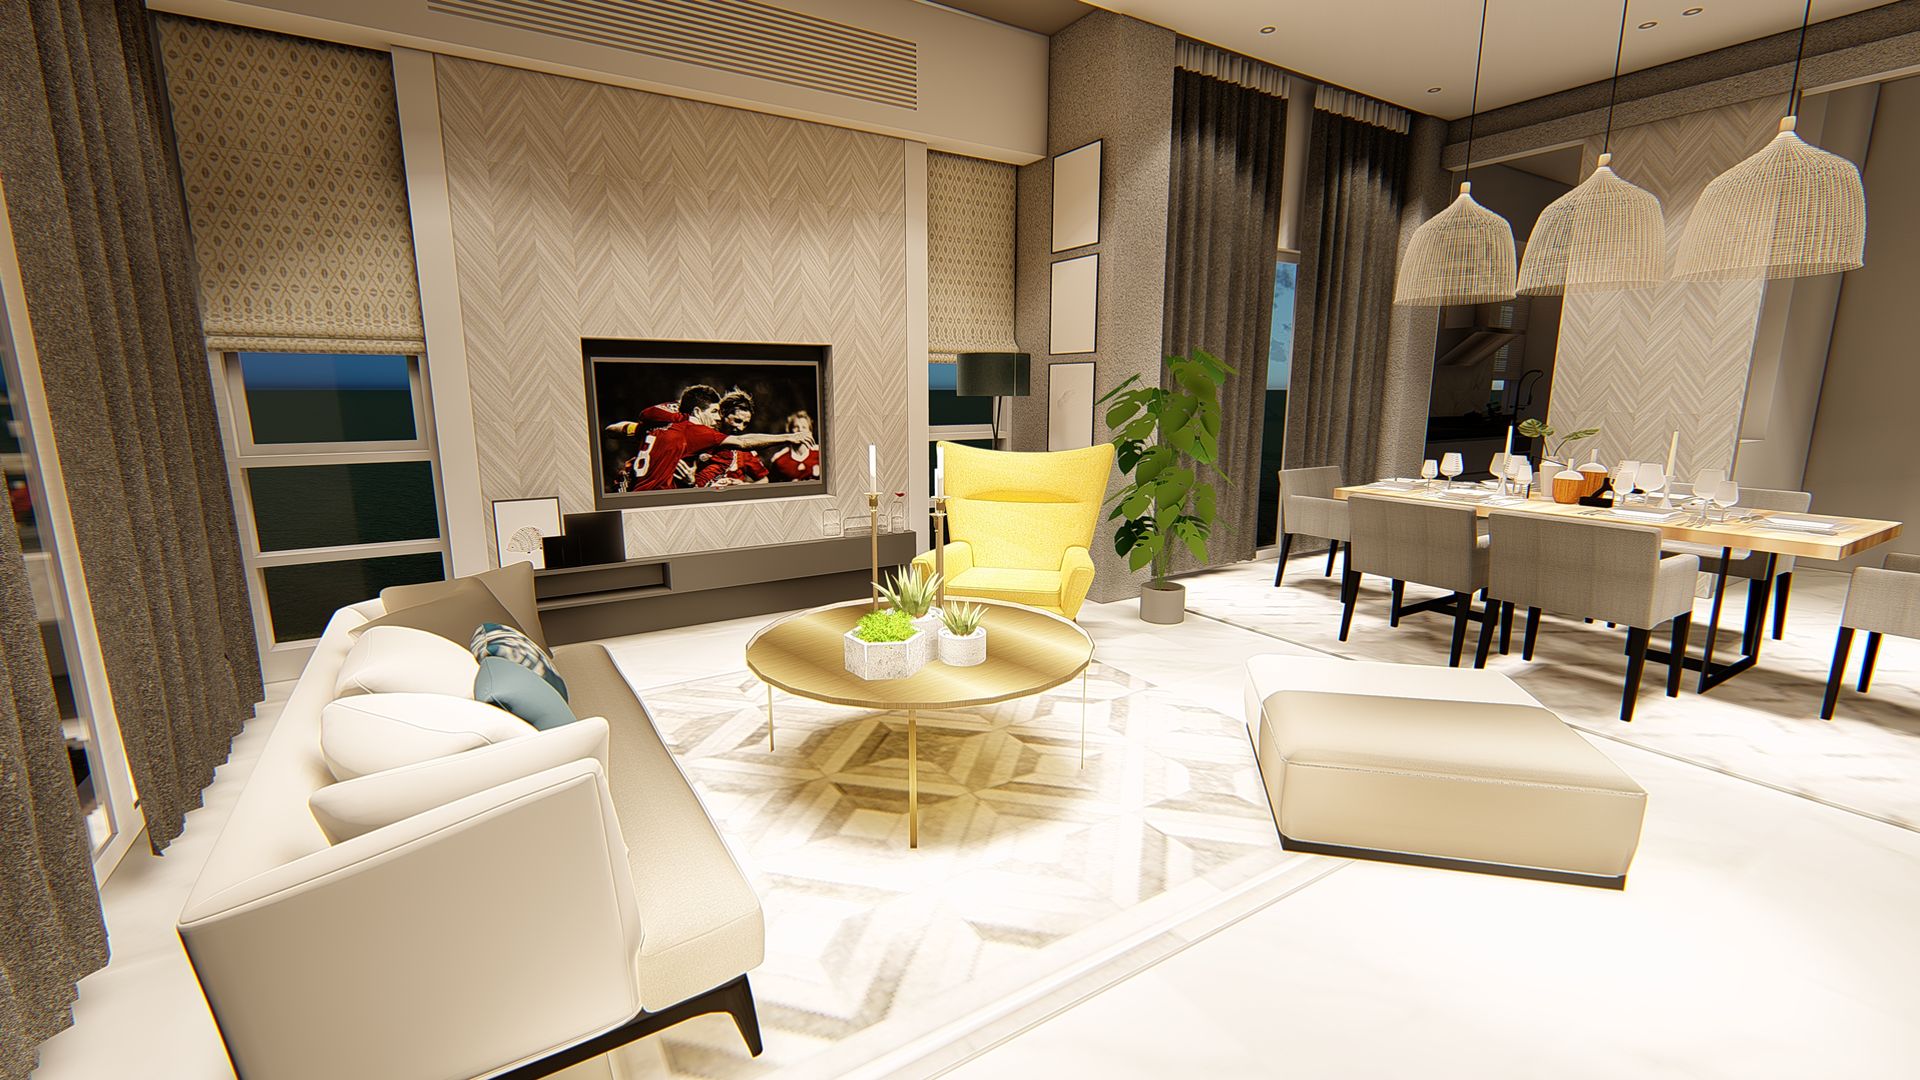 Seamless merging of Living Room and Dining Room LI A'ALAF ARCHITECT Modern living room